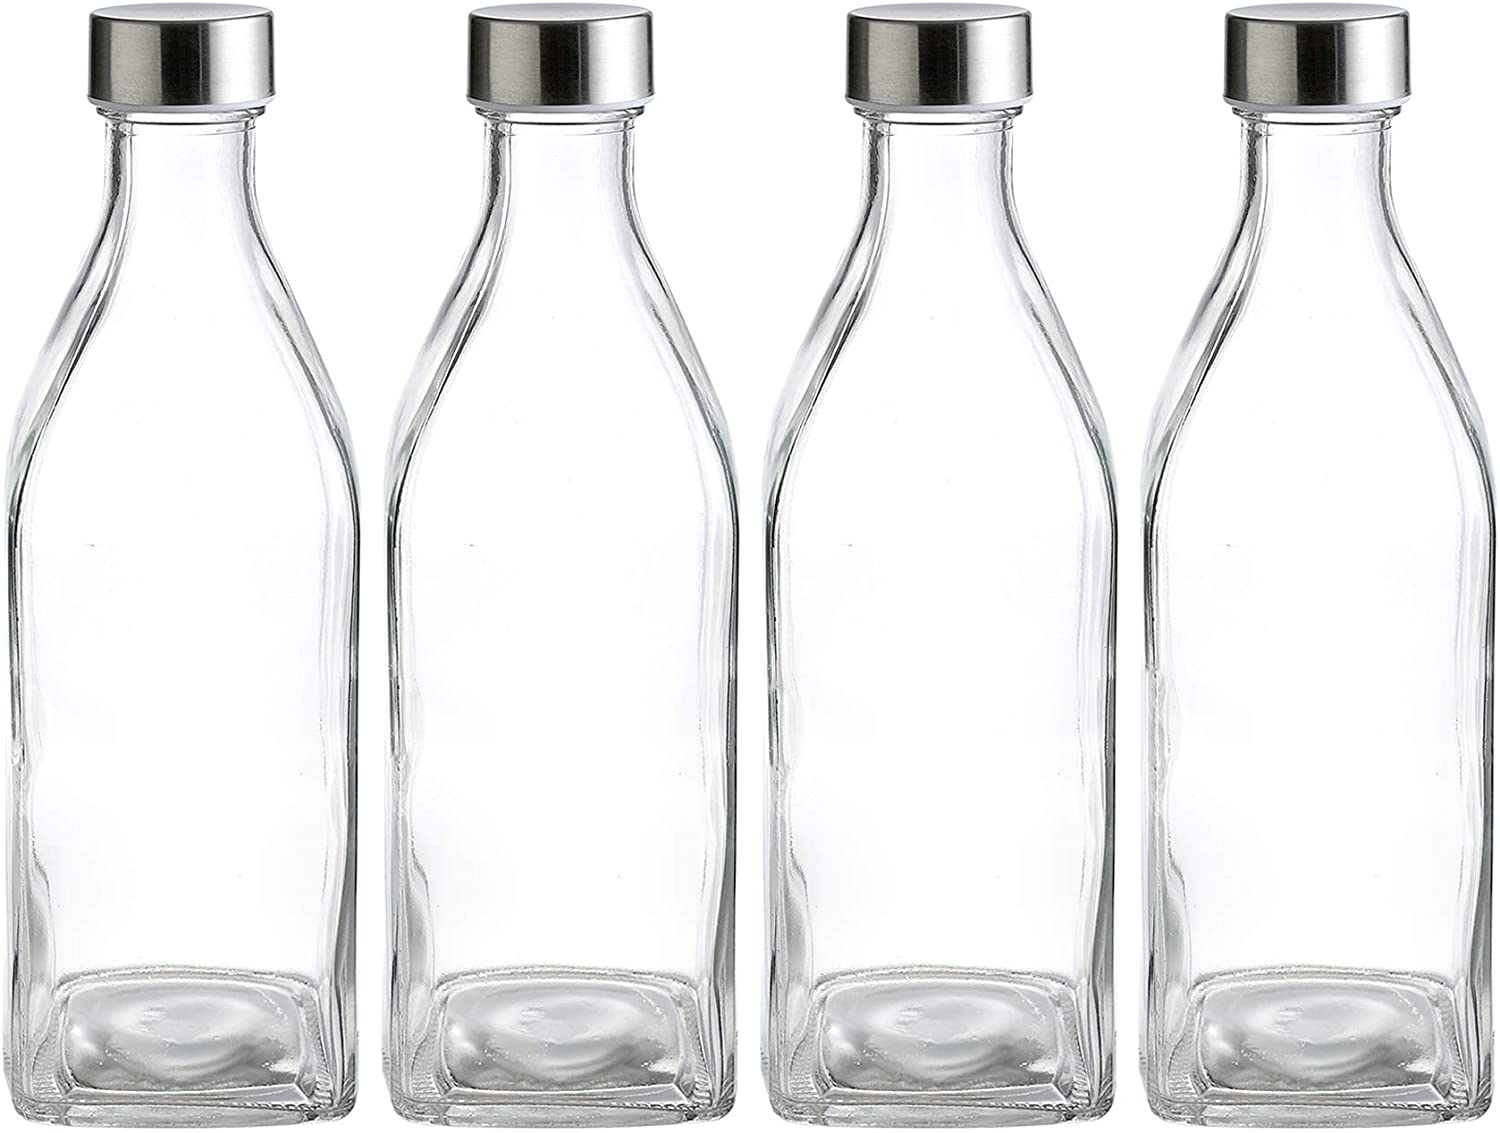 34 Oz Glass Square Water Bottles for Beverages and Juicer Use Stainless Steel Leak Proof Lids